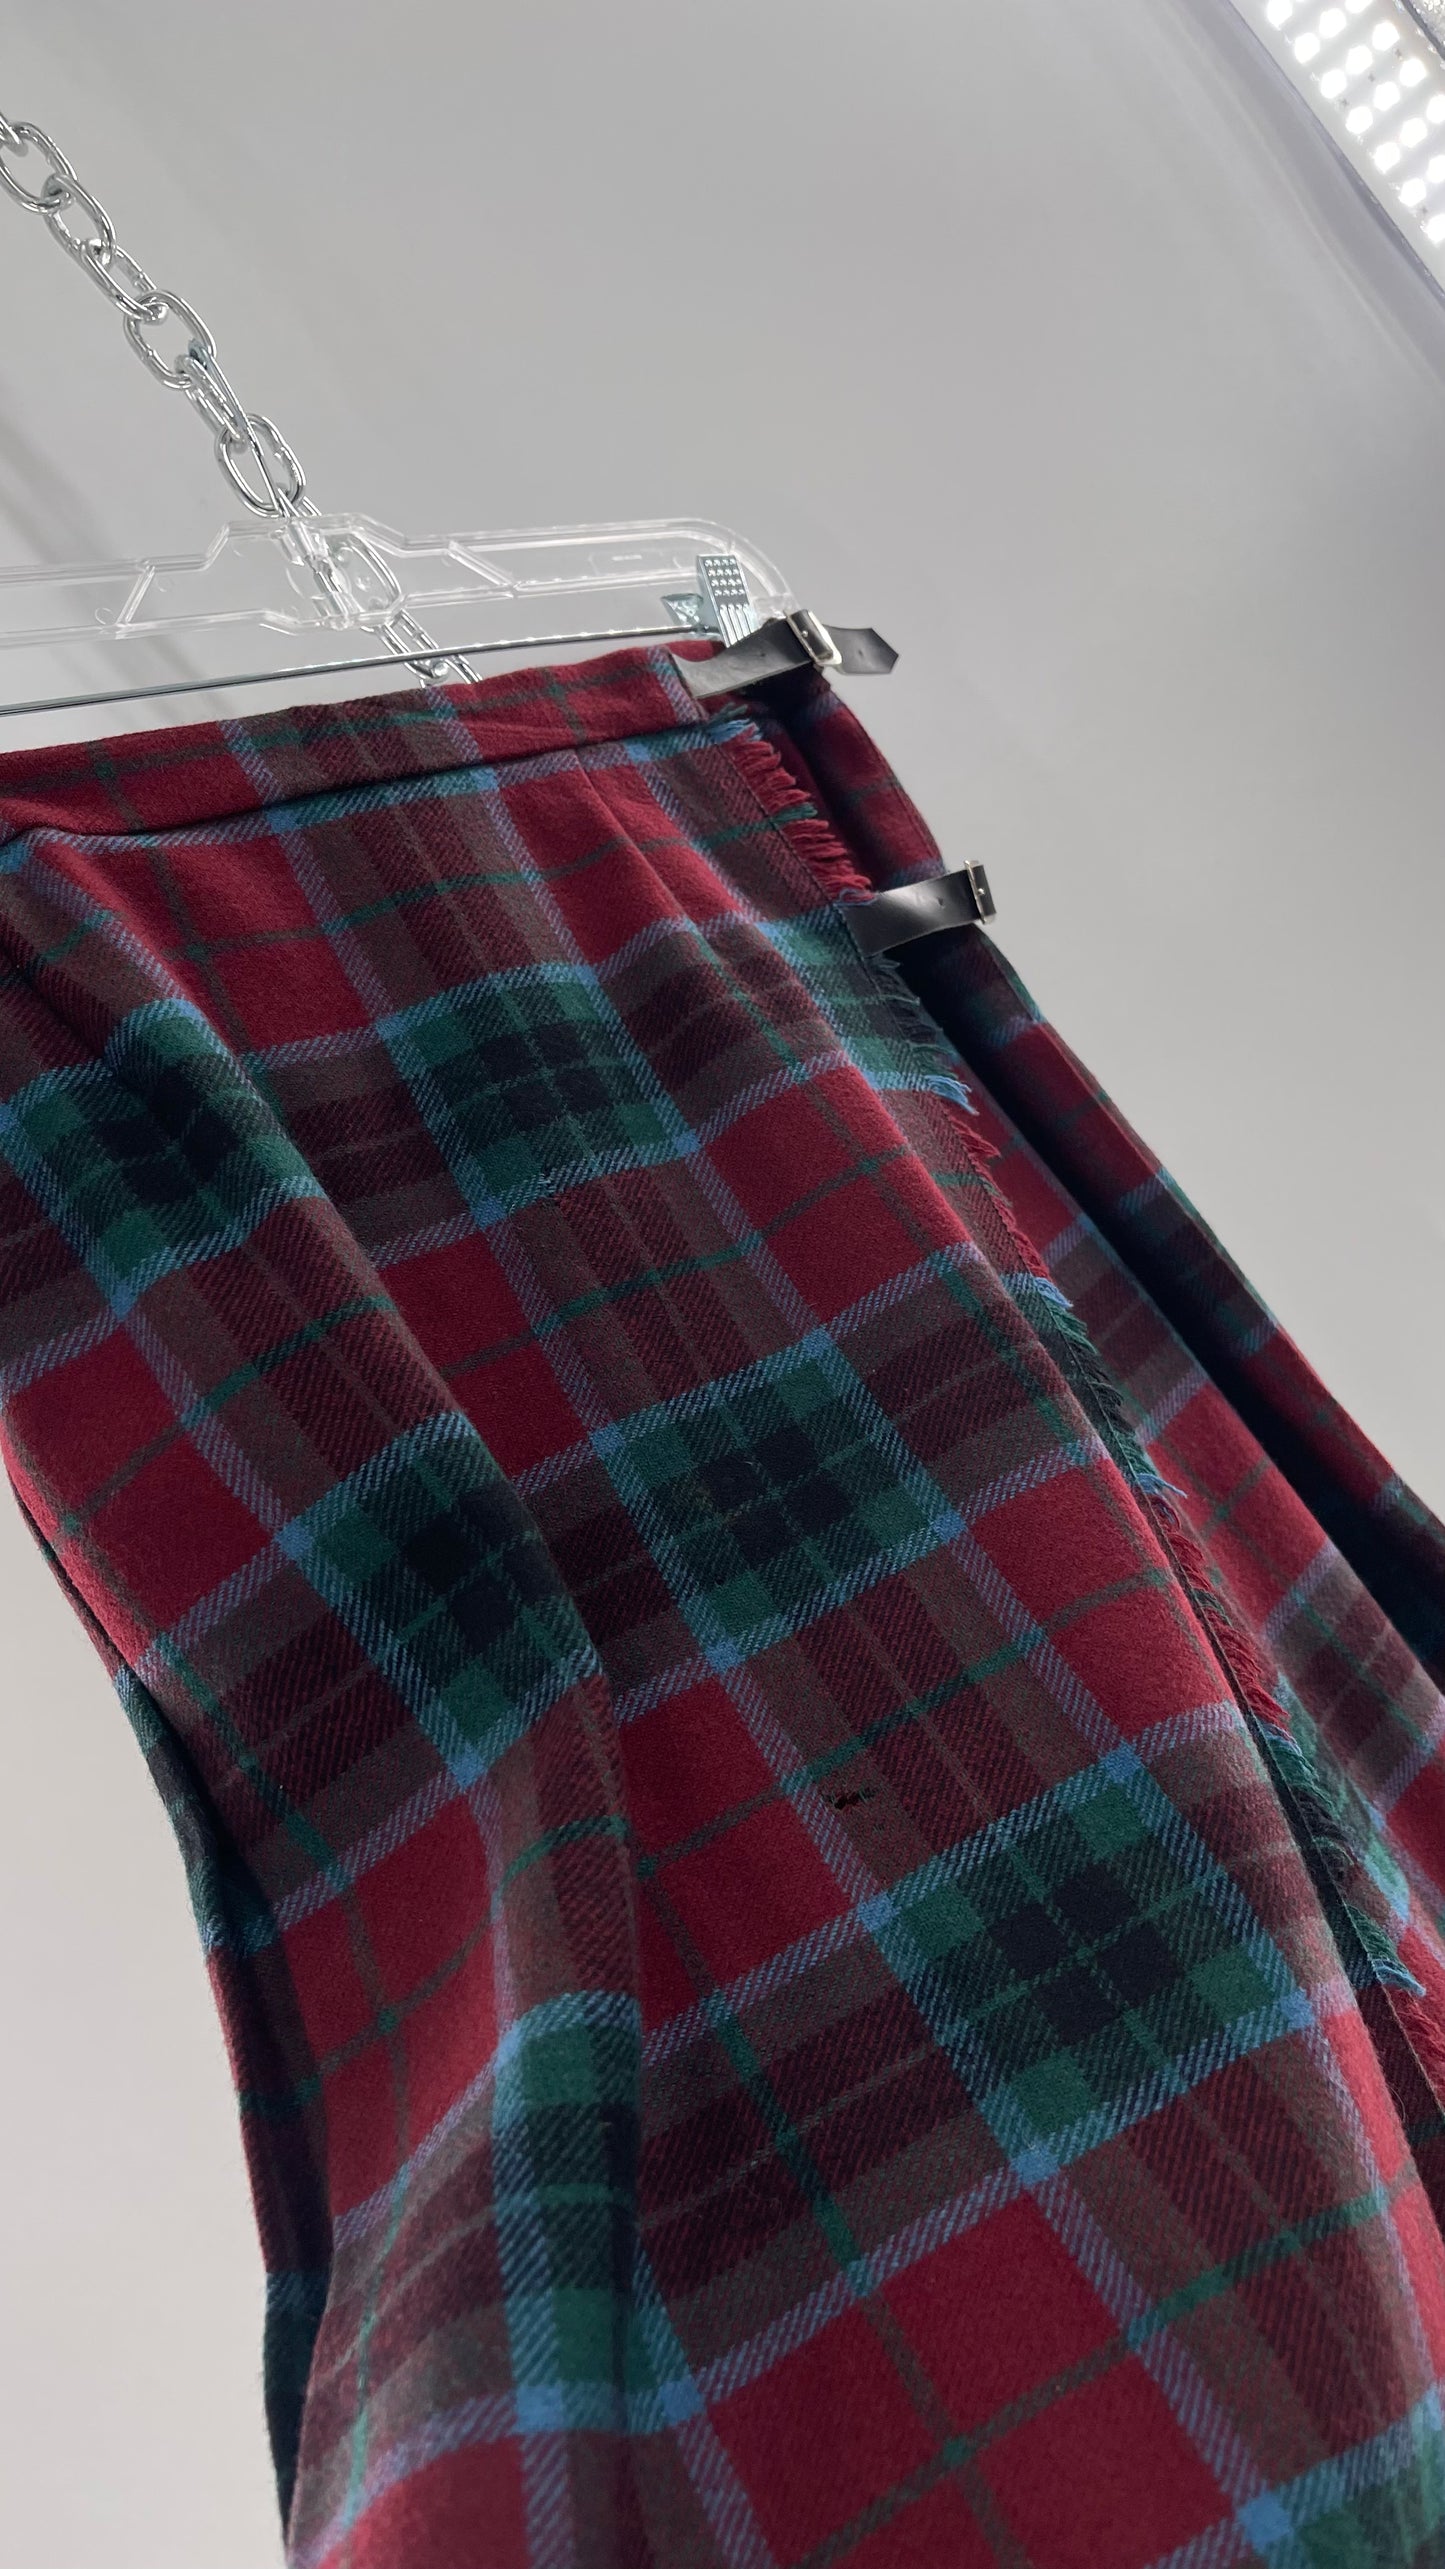 Vintage Clan Crest Pure New Wool Tartan Plaid Skirt with Oversized Pin Made in Scotland (36)